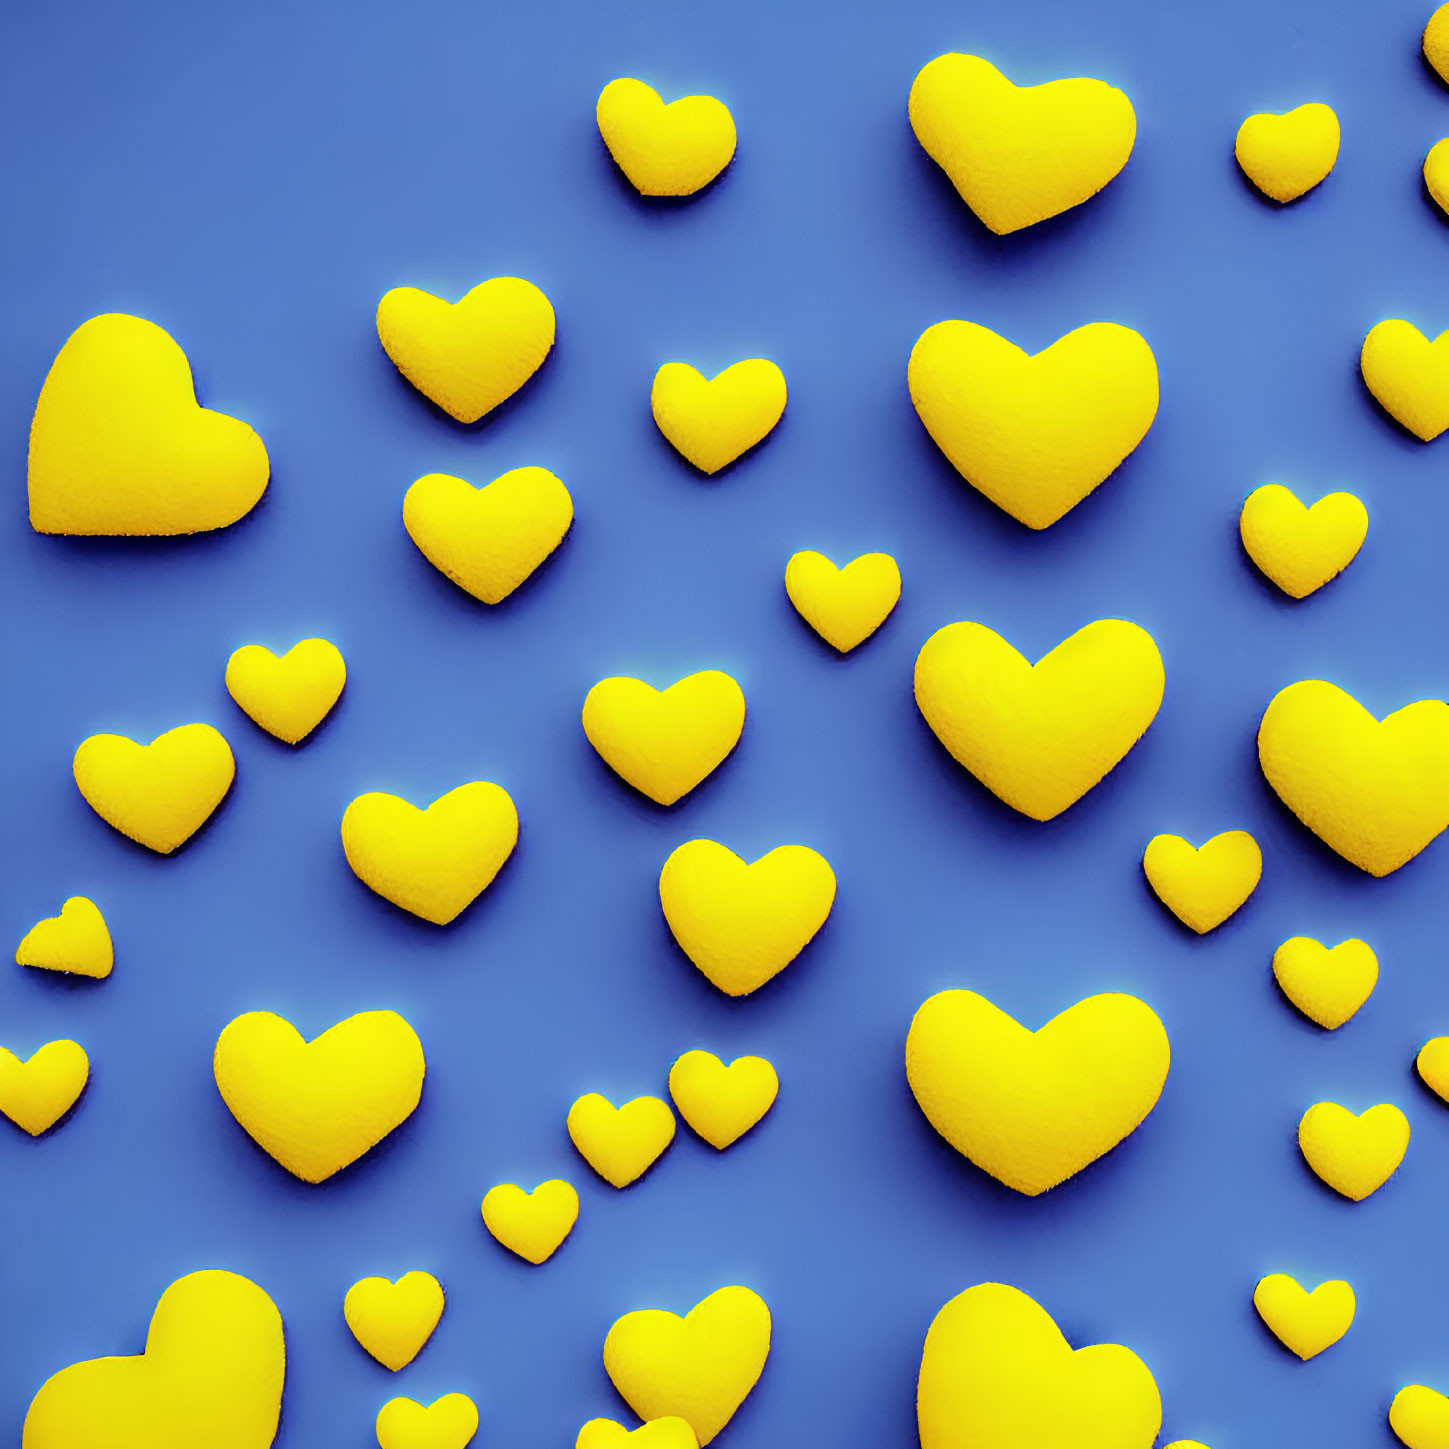 Yellow Heart-Shaped Objects on Blue Background